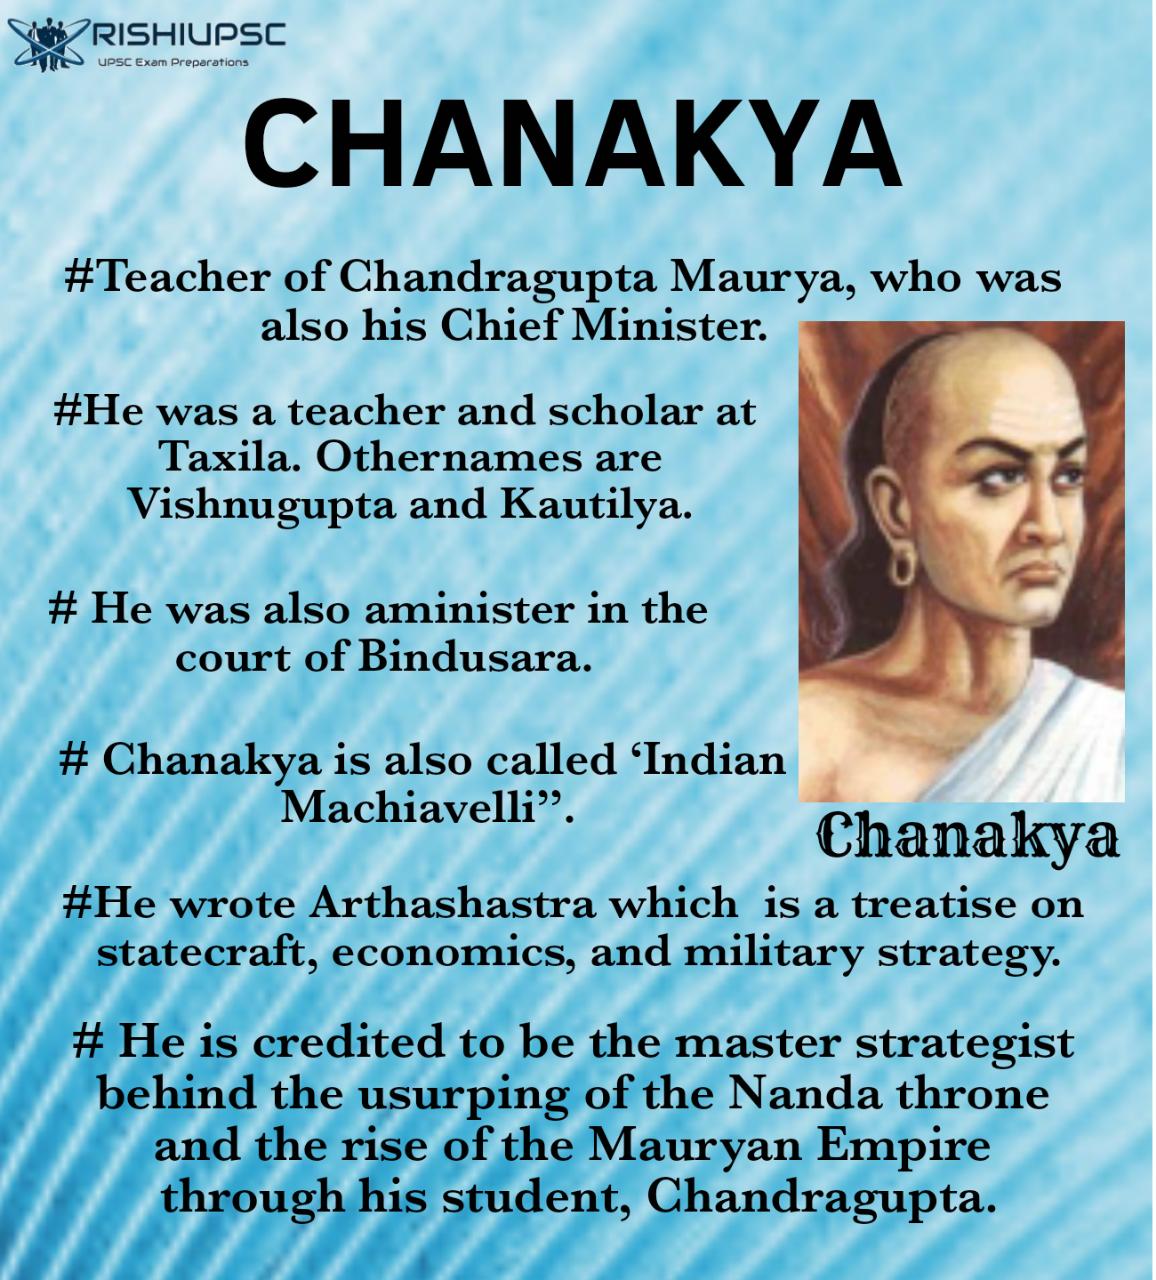 chanakya phd assistance review